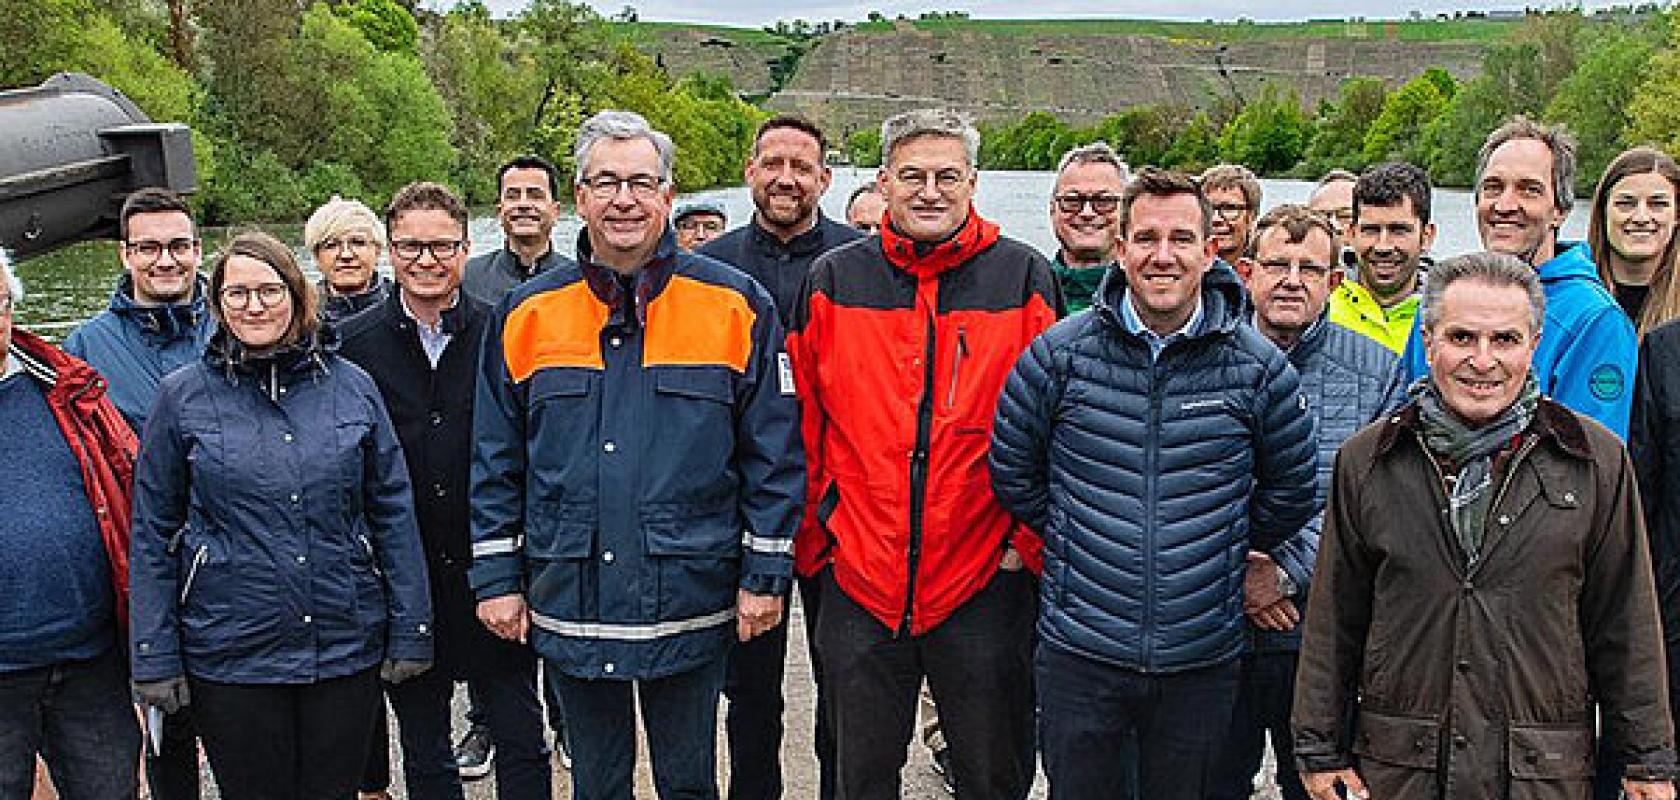 HLRS presented the digital twin to district commissioner Dietmar Allgaier and other local officials on a boat trip along the Neckar.